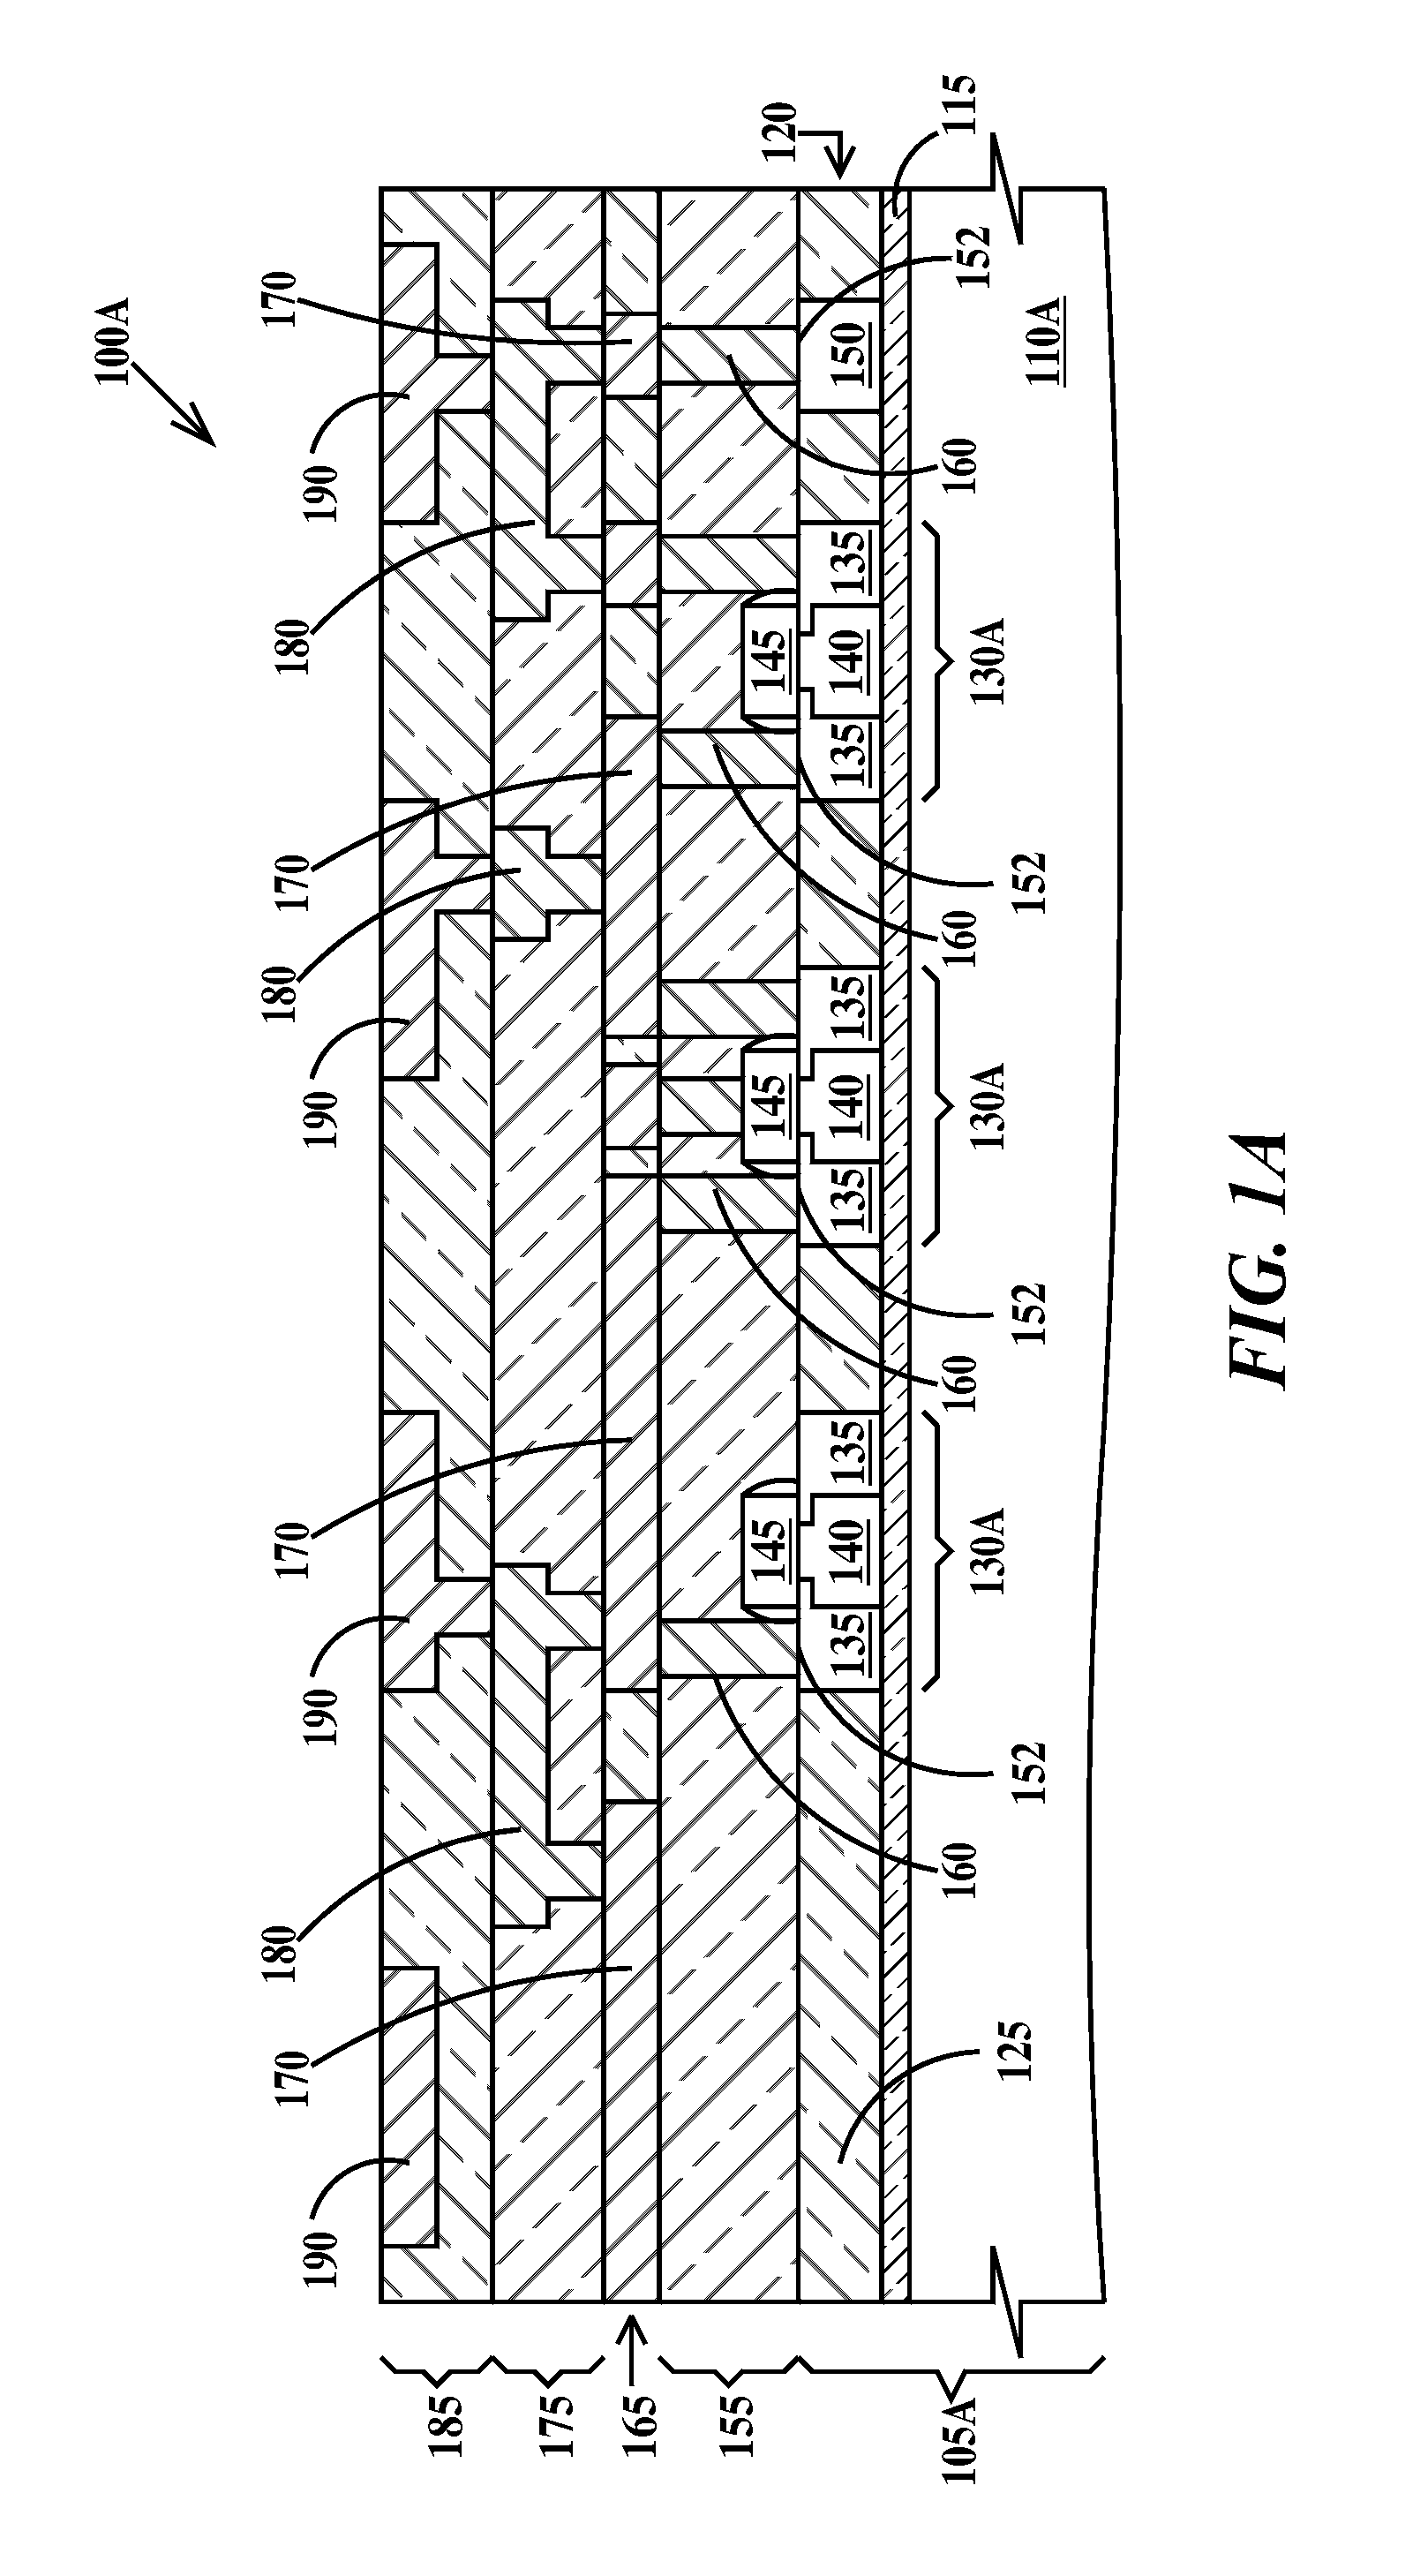 Double-sided integrated circuit chips